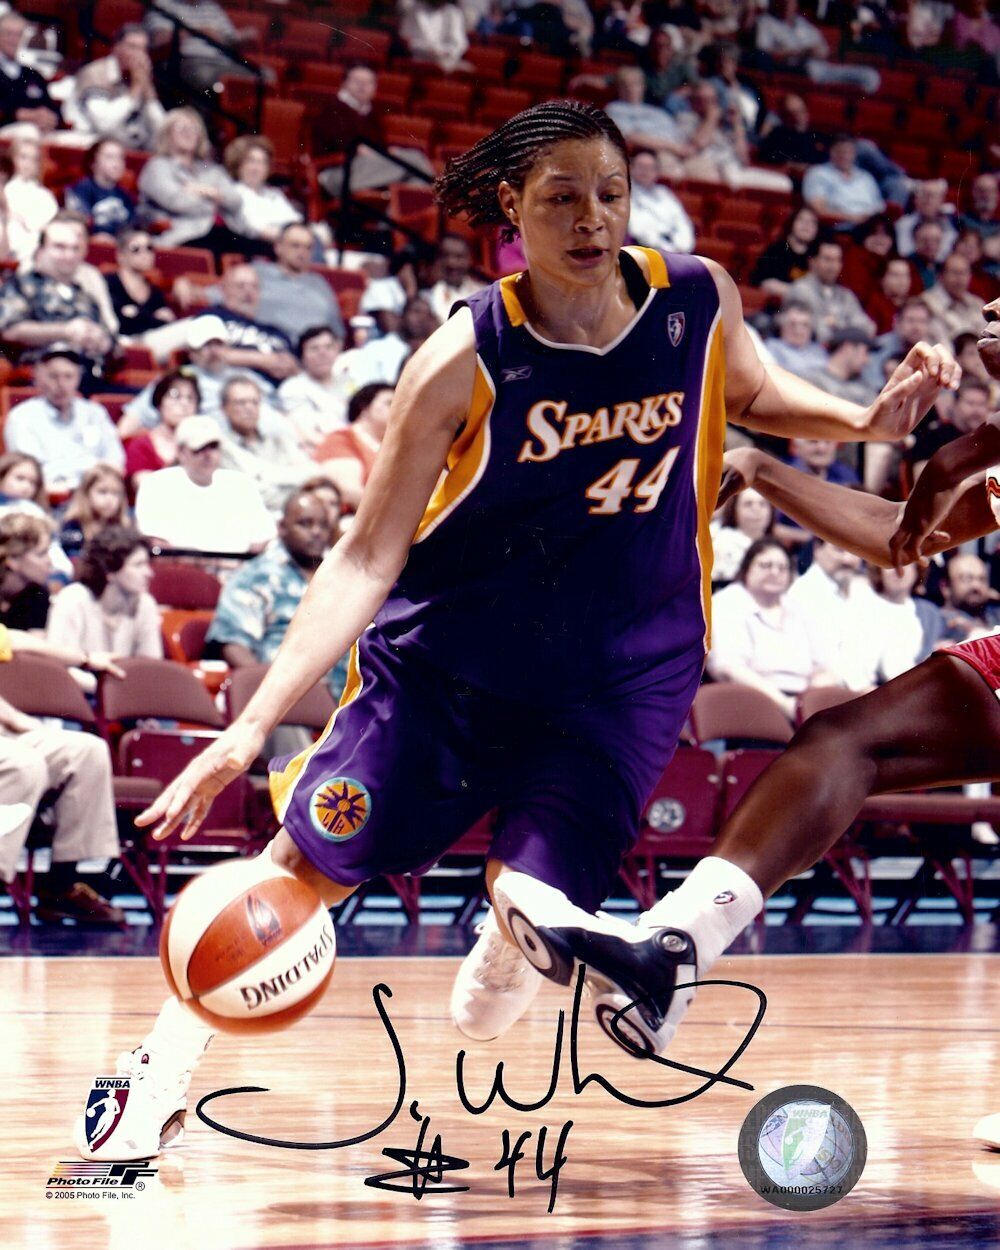 Tamika Whitmore Signed Autographed 8X10 Photo Poster painting Sparks Action Dribbling WNBA w/COA